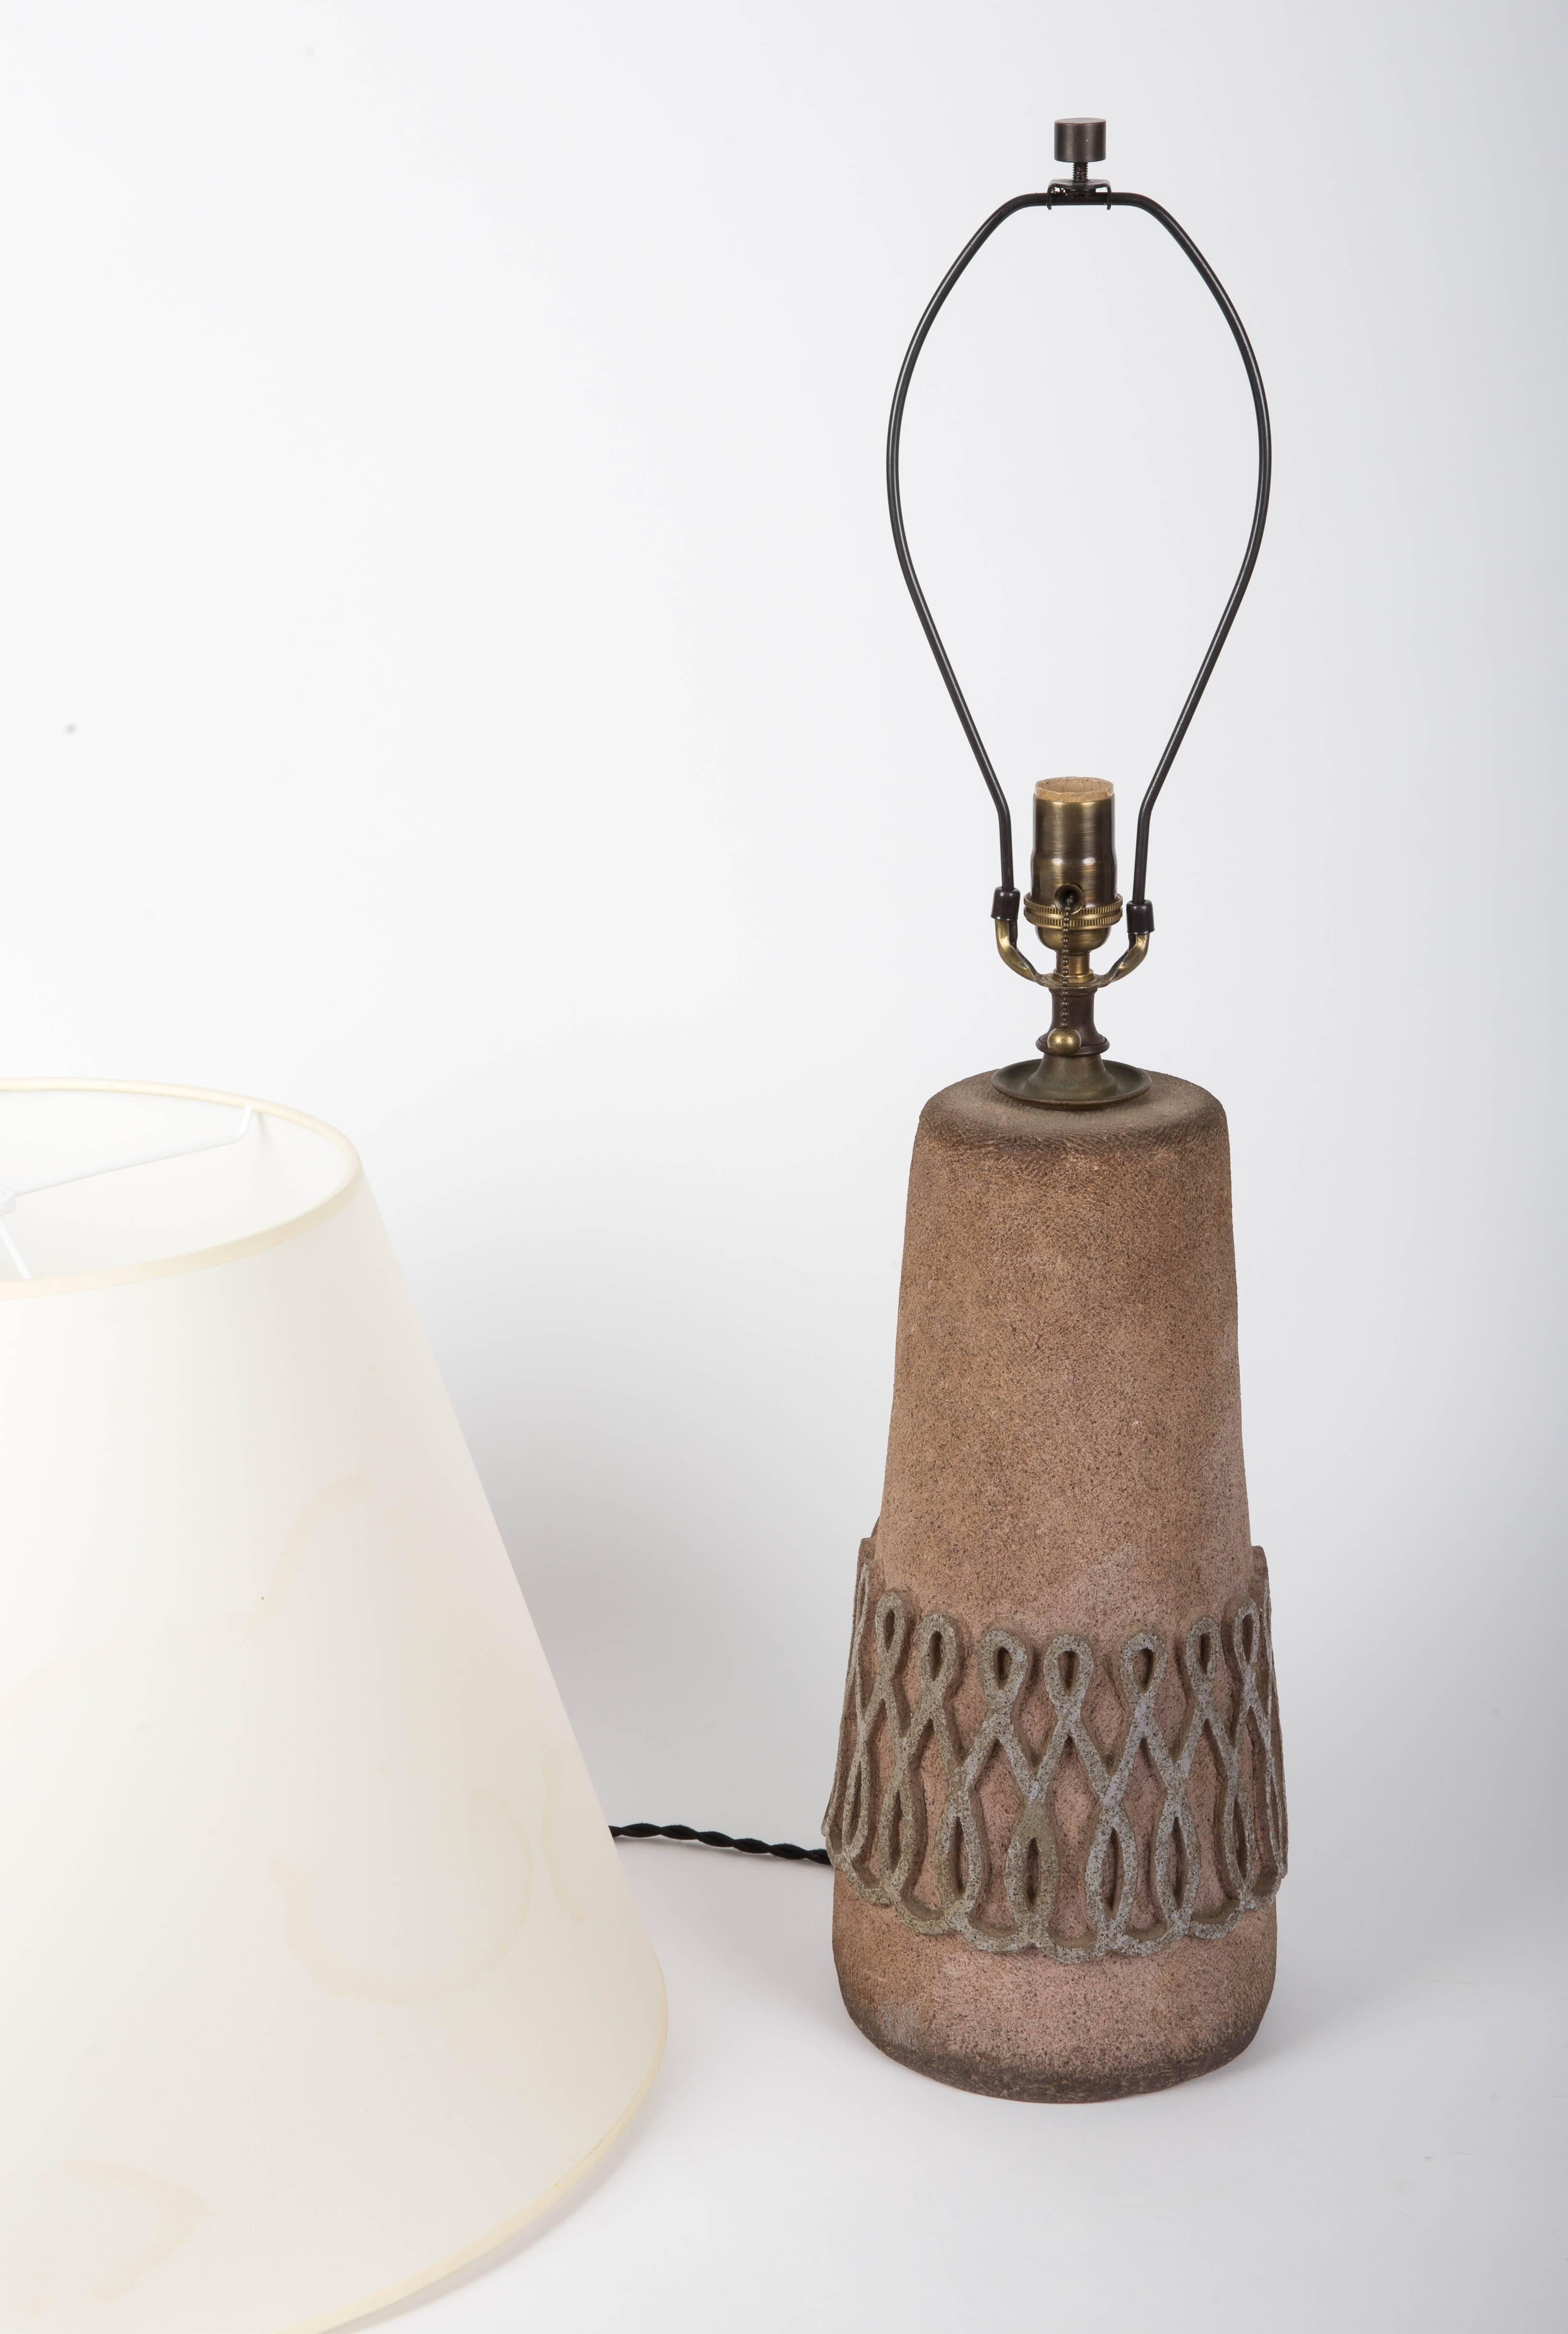 Textured Stone Table Lamp with Intricate Design, France, 20th Century  1